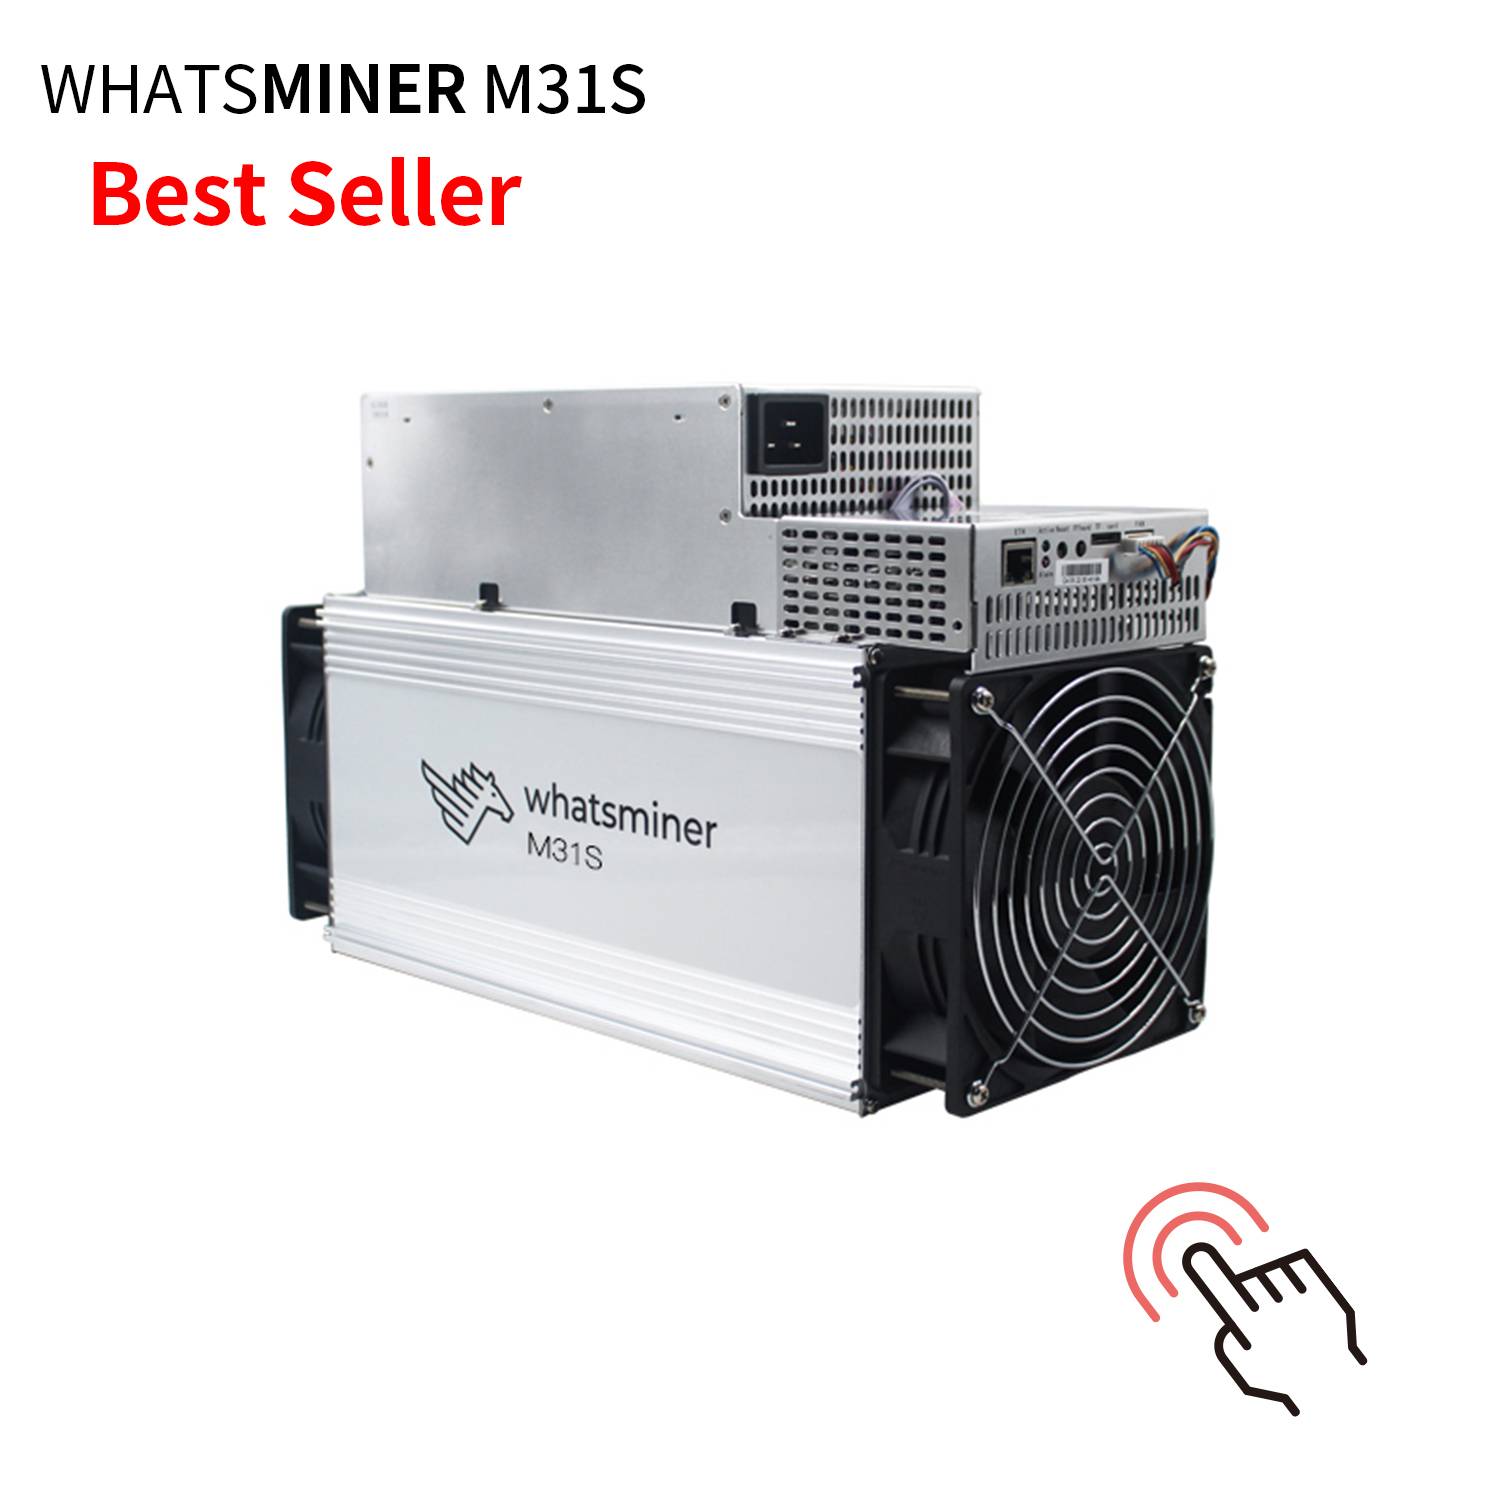 China High Profitability MicroBT Whatsminer M31S 70Th/s ...